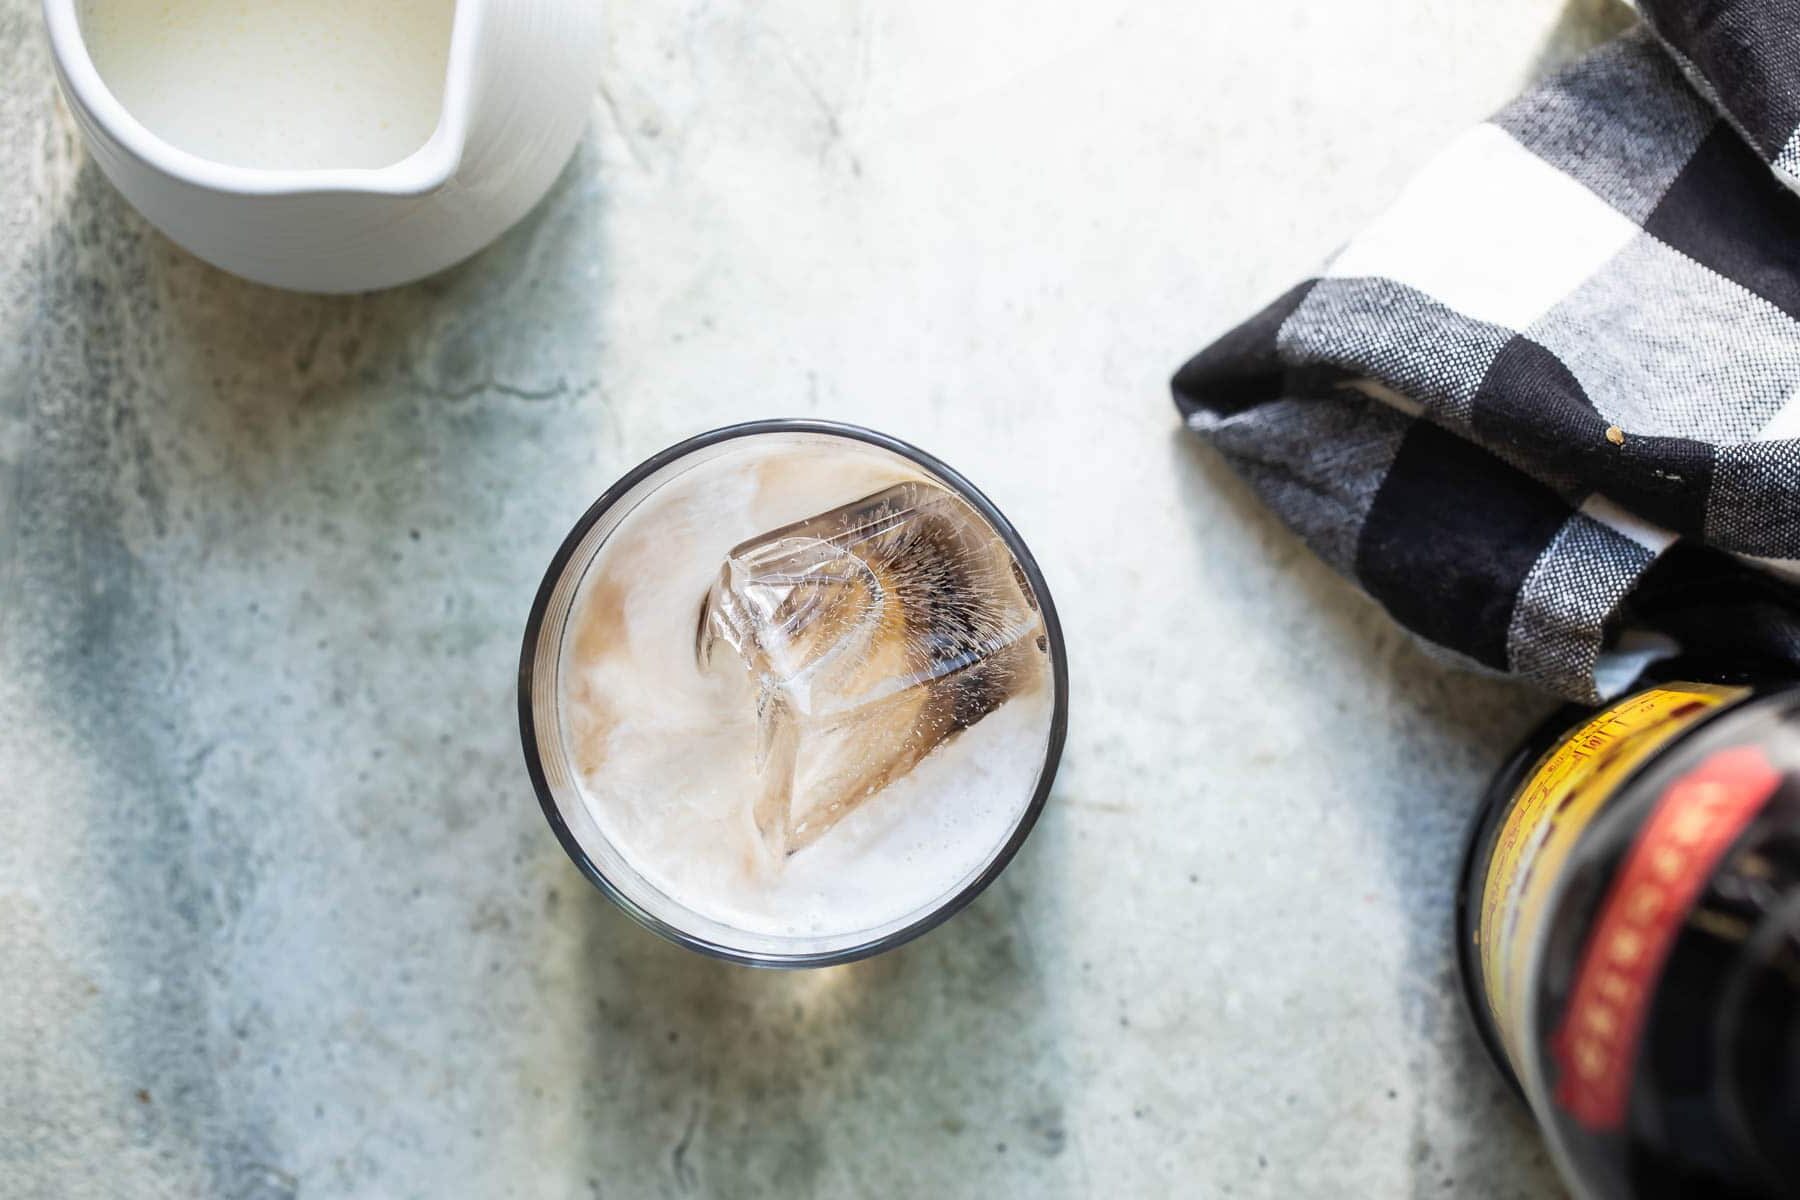 A white Russian cocktail with a bottle of Kahlua in the background.